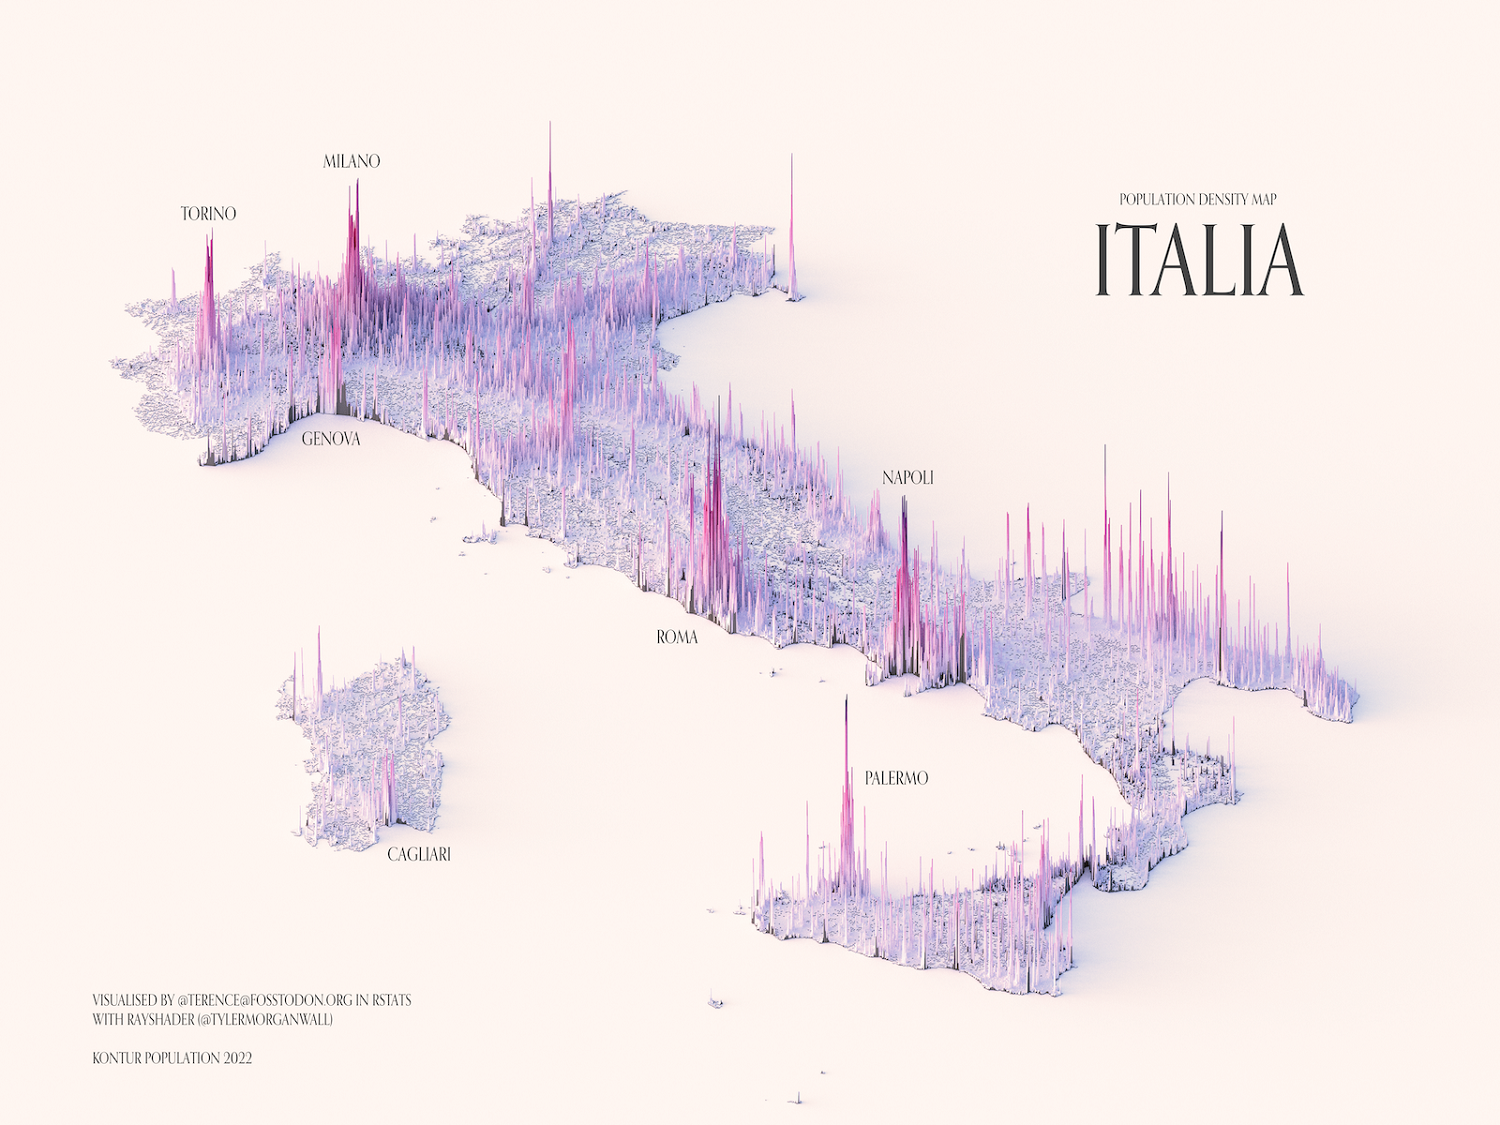 This image shows a map of Italy and its population spread.